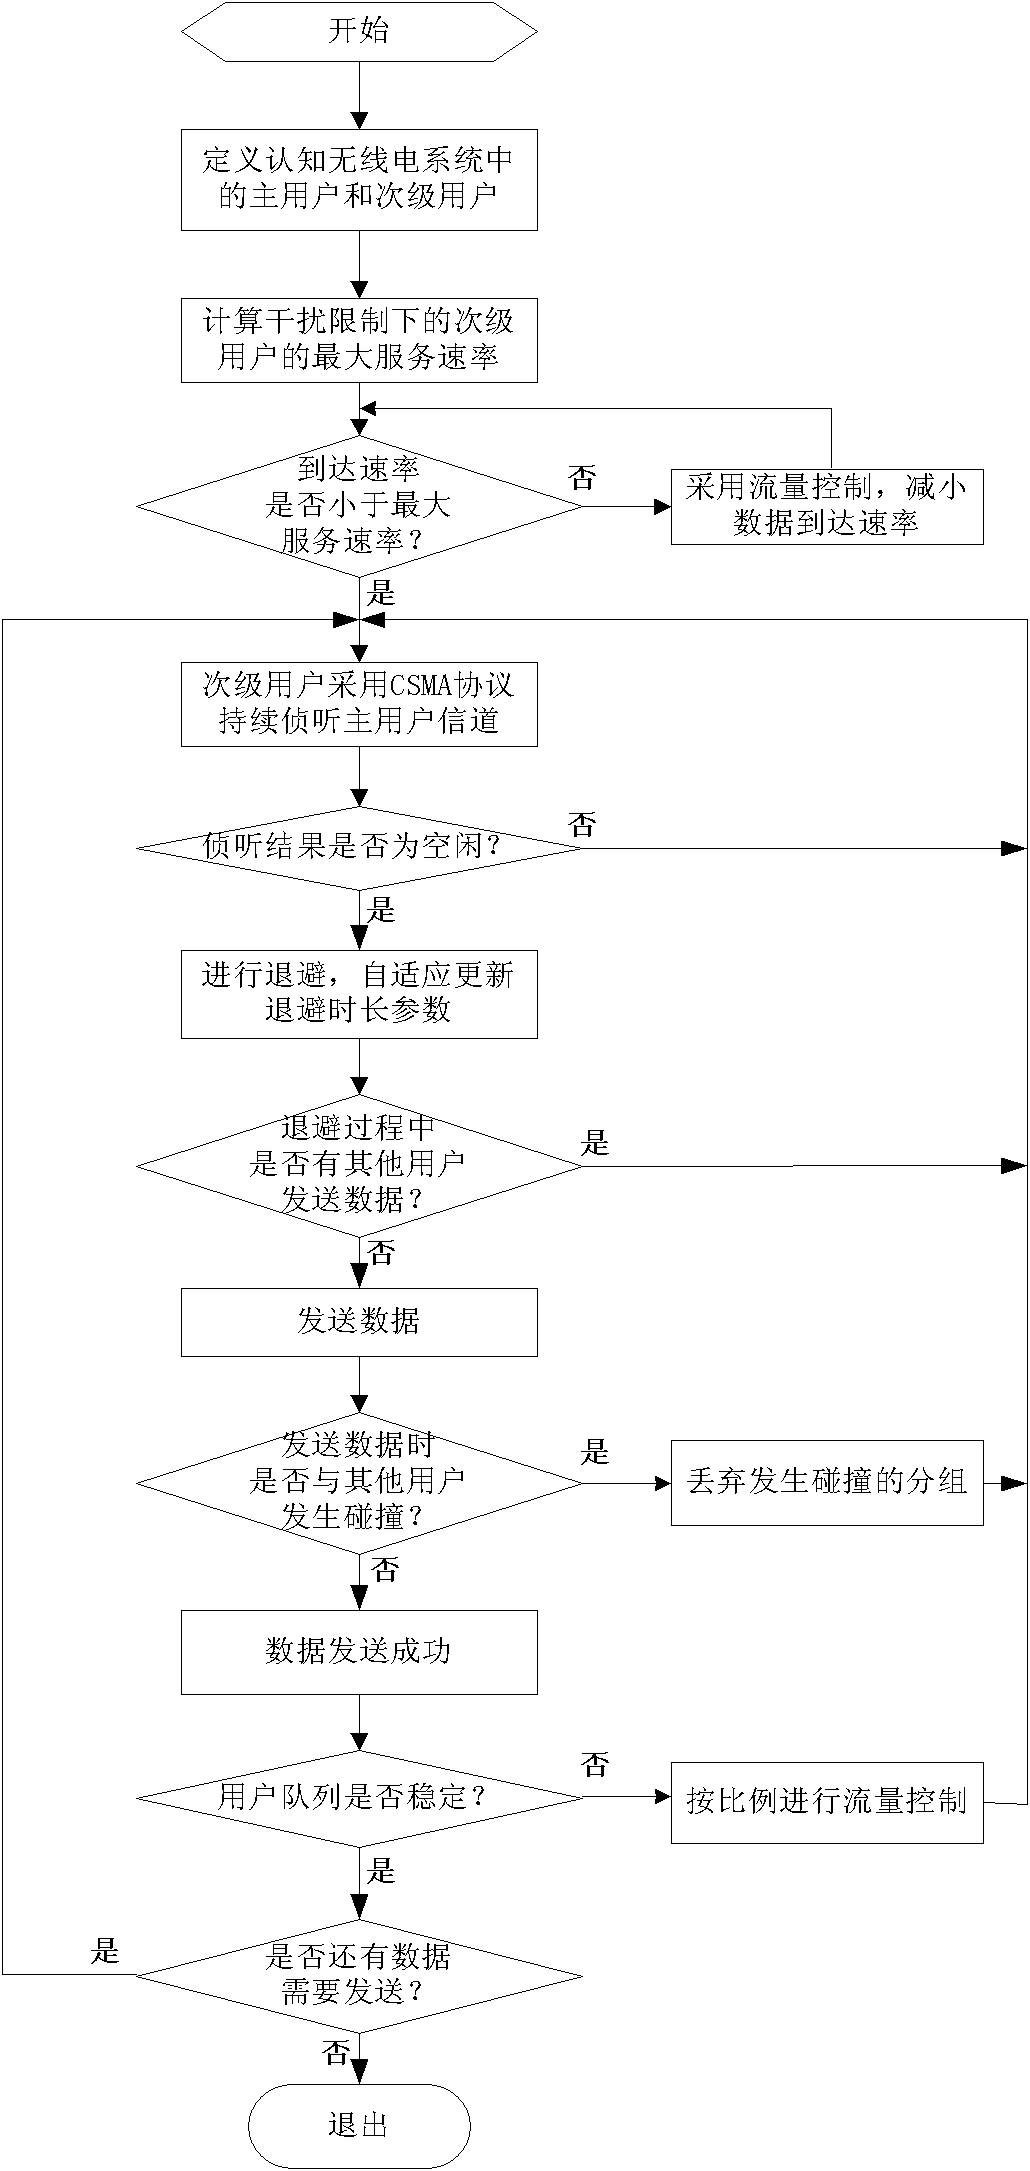 Spectrum access method for distributed cognitive radio system